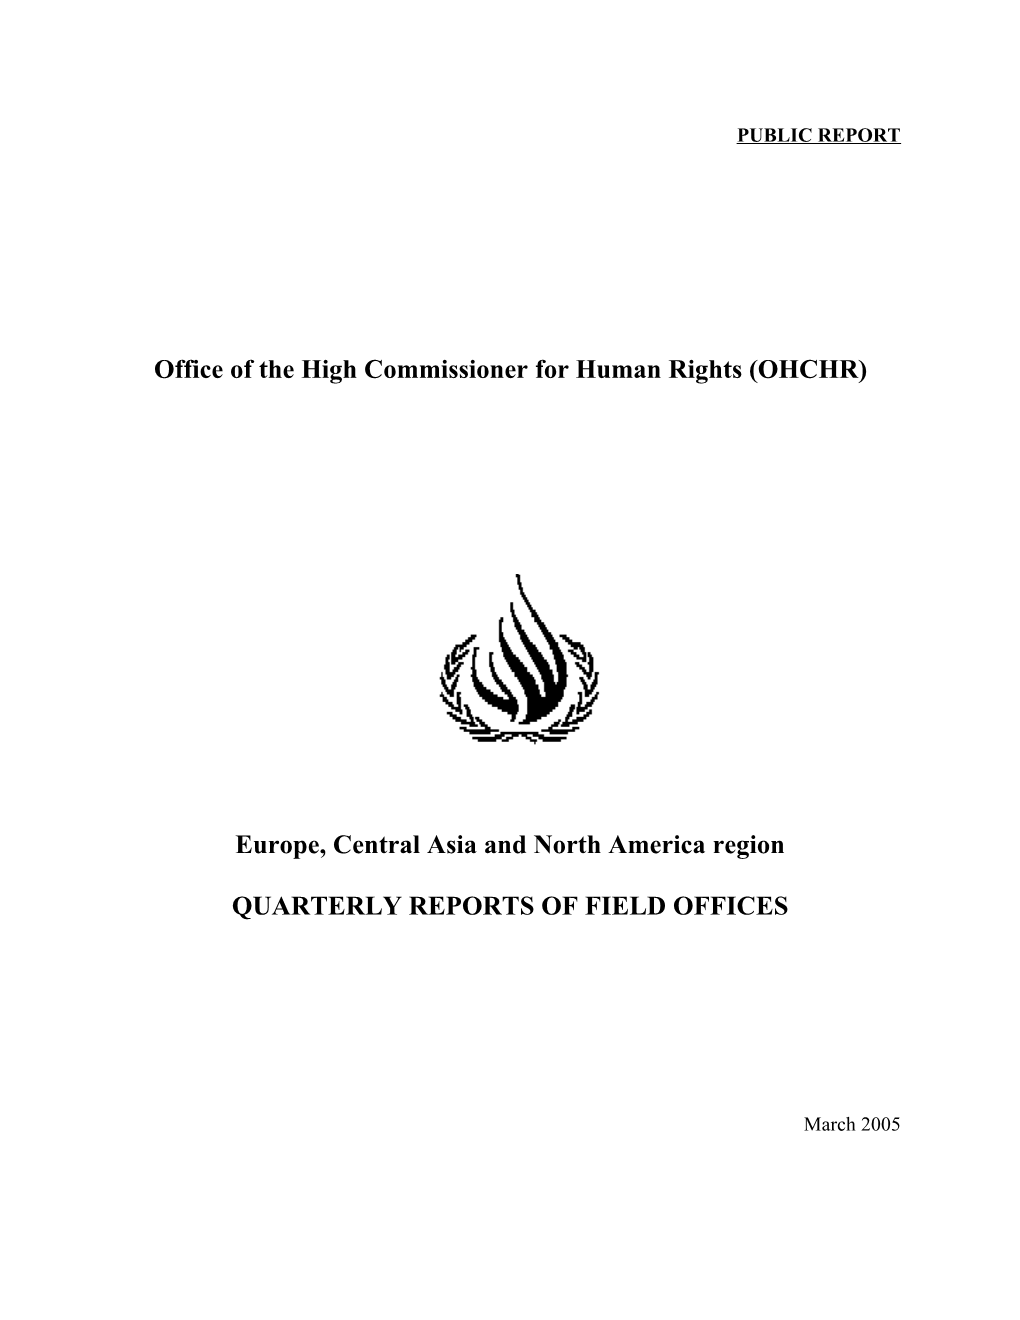 Office of the High Commissioner for Human Rights (OHCHR) s1